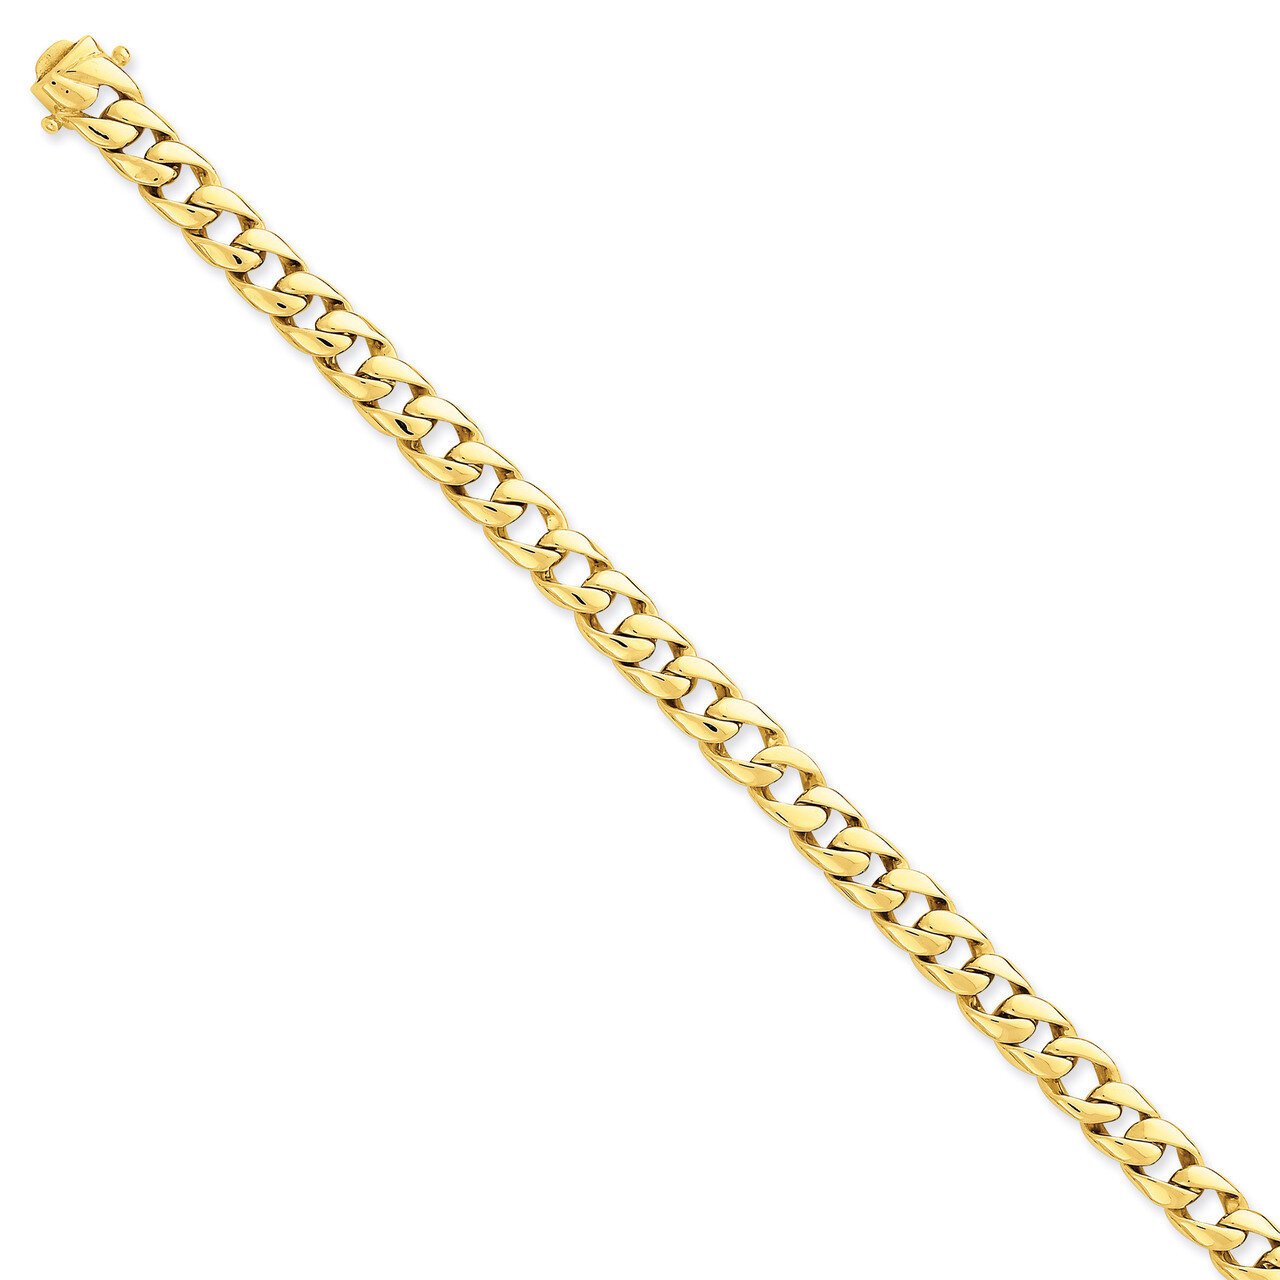 7.75mm Solid Hand-Polished Curb Link Chain 9 Inch 14k Gold FL445-9